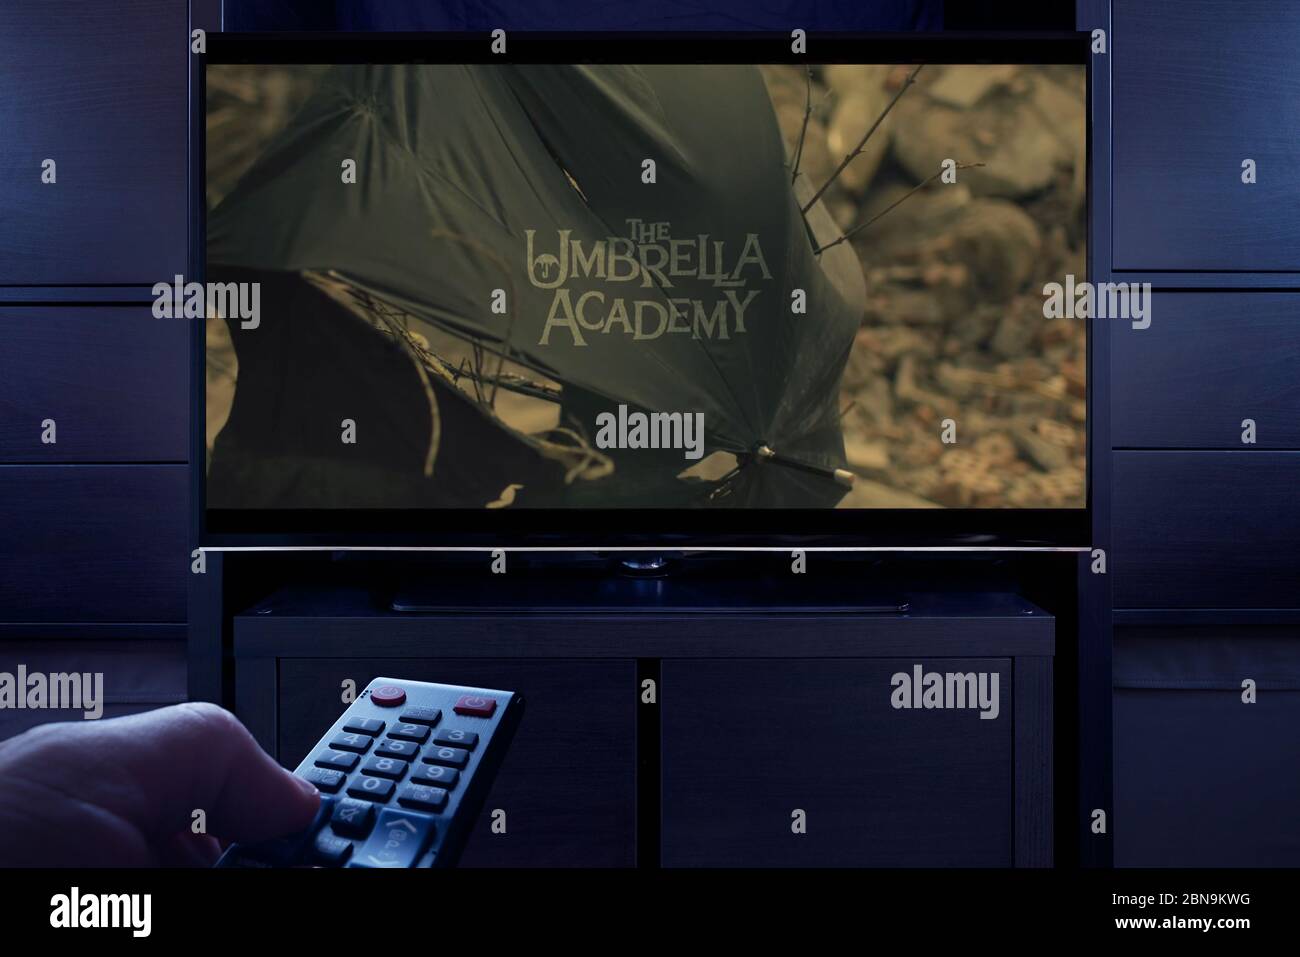 A man points a TV remote at the television which displays the The Umbrella Academy main title screen (Editorial use only). Stock Photo